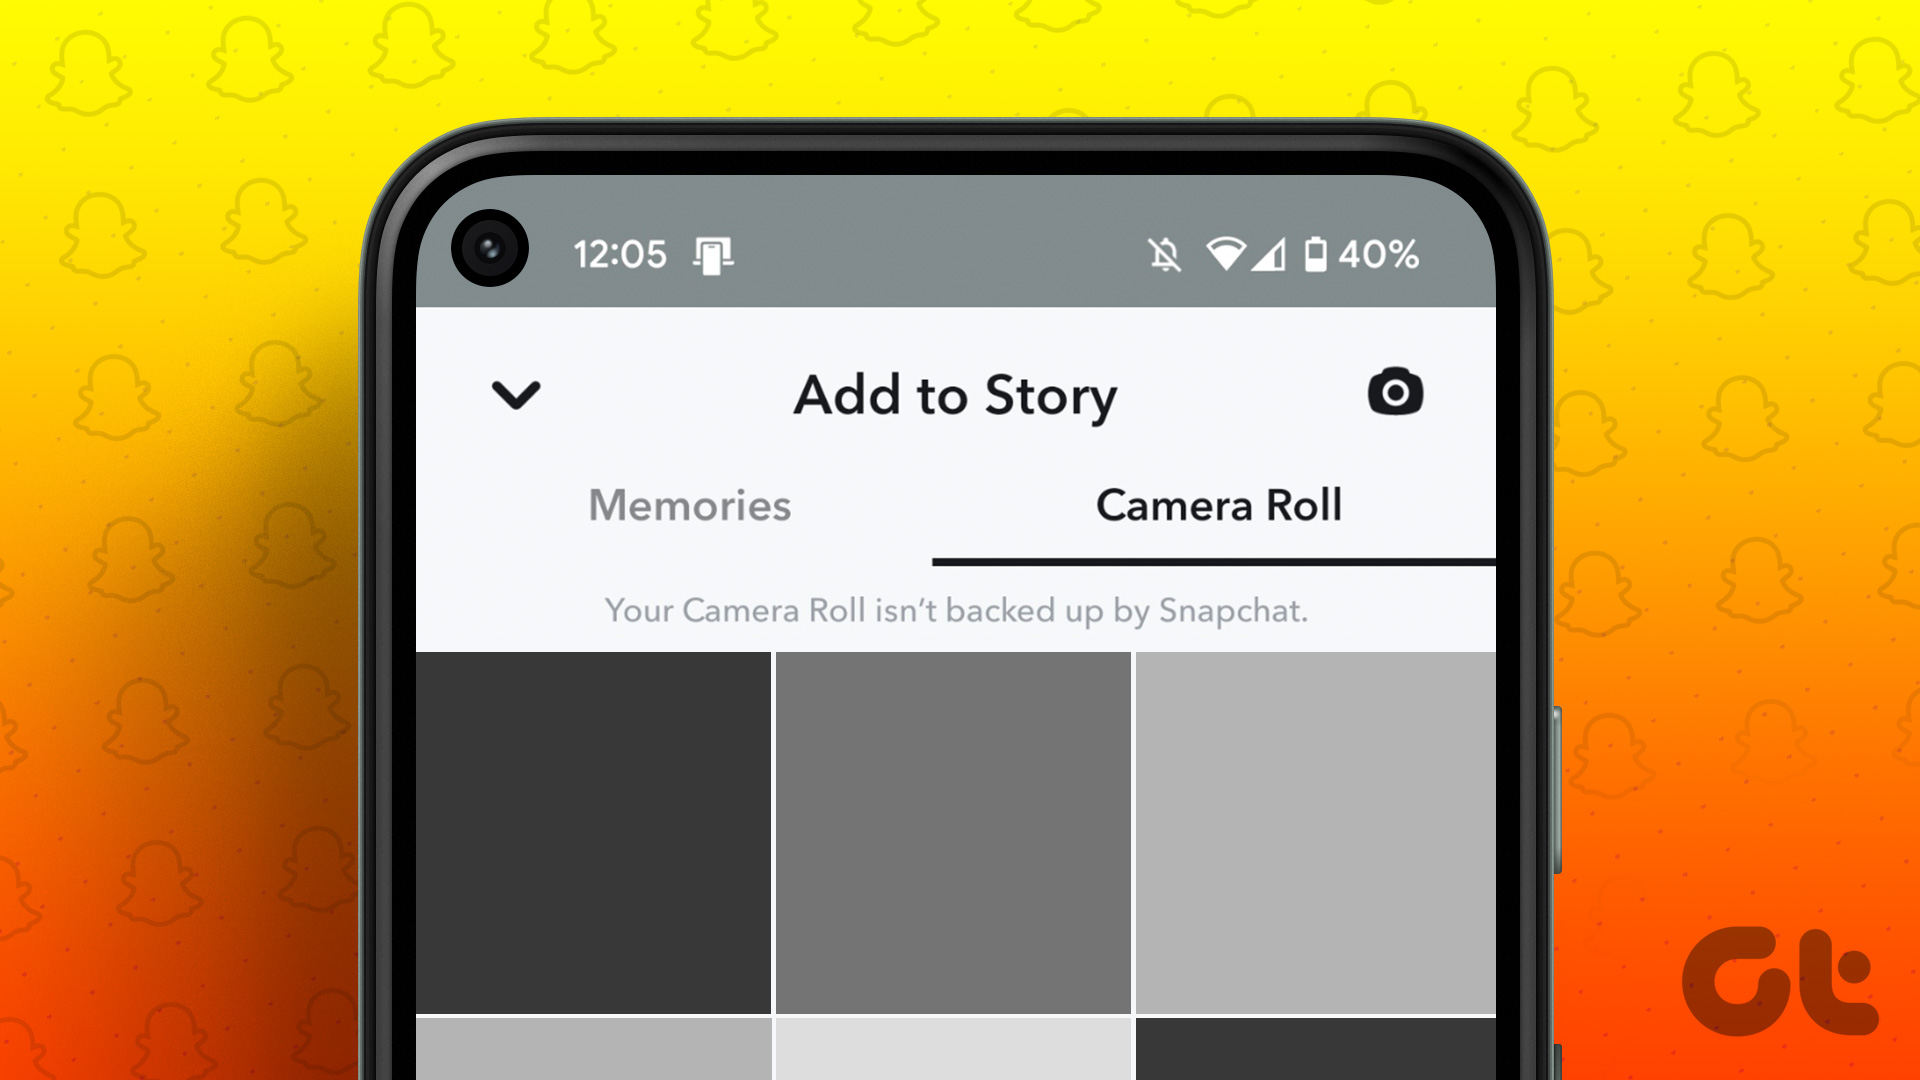 How to Add Camera Roll Photos to Snapchat Story